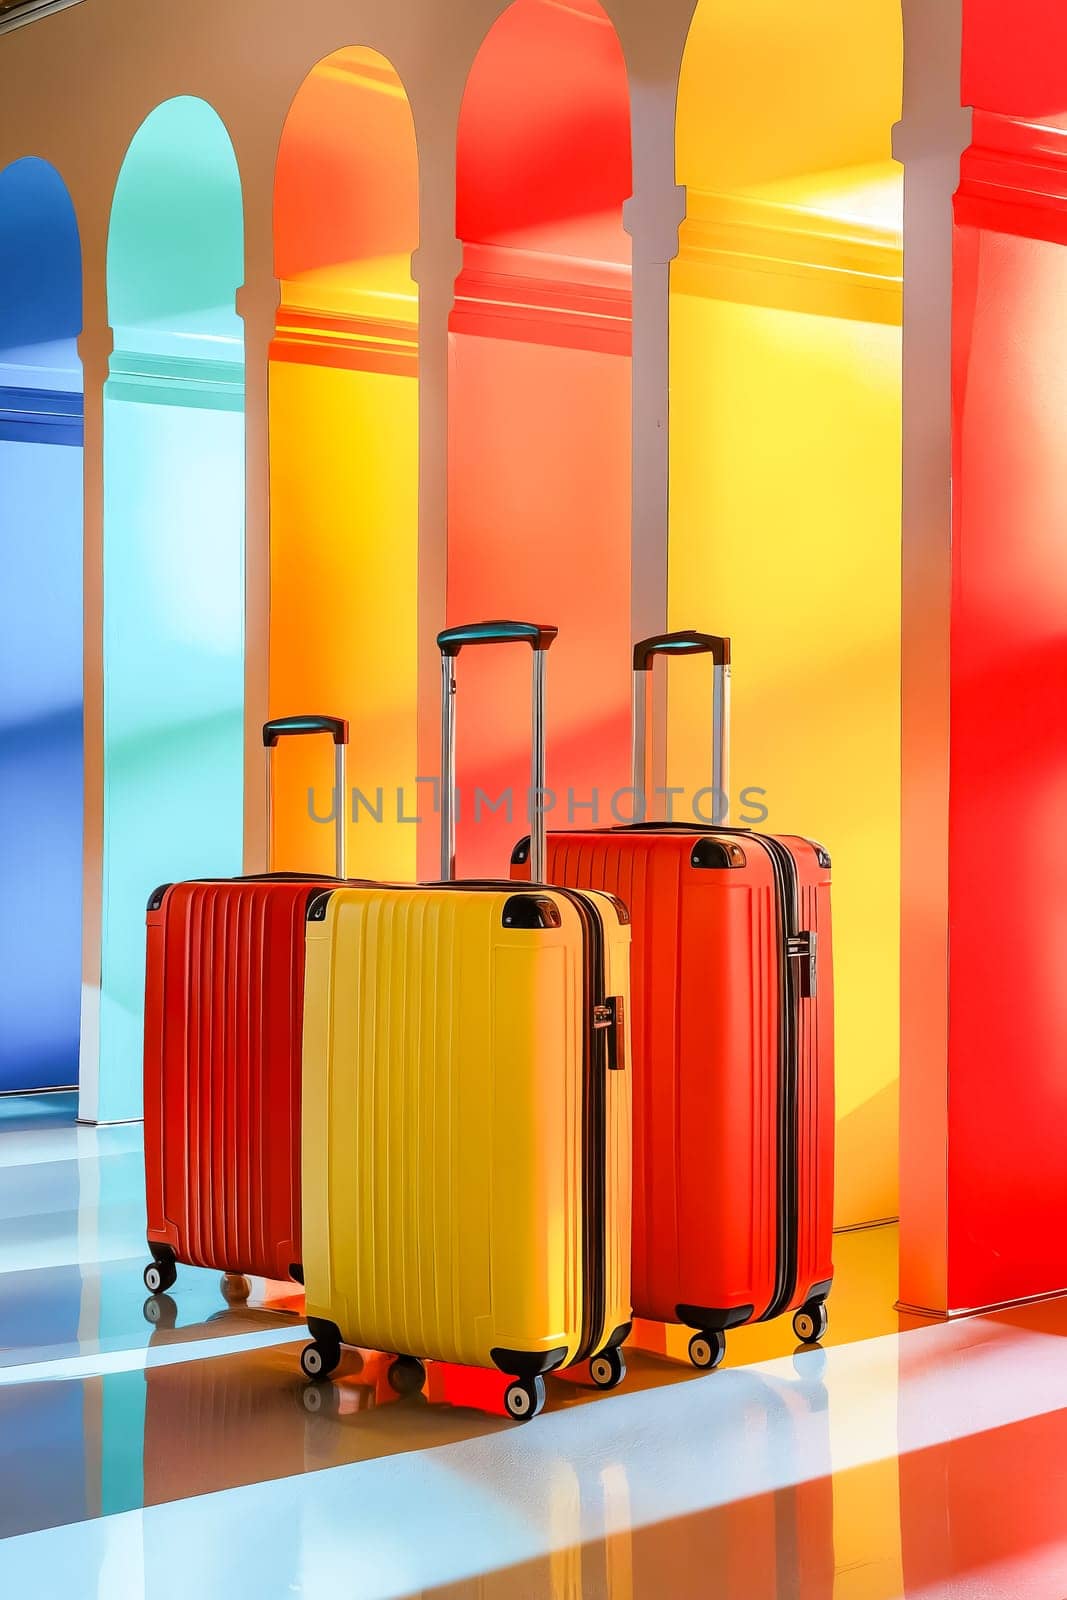 Three suitcases of different colors are lined up against a wall. The suitcases are yellow, red, and orange. The colorful suitcases are arranged in a row, creating a vibrant and eye-catching display. Generative AI